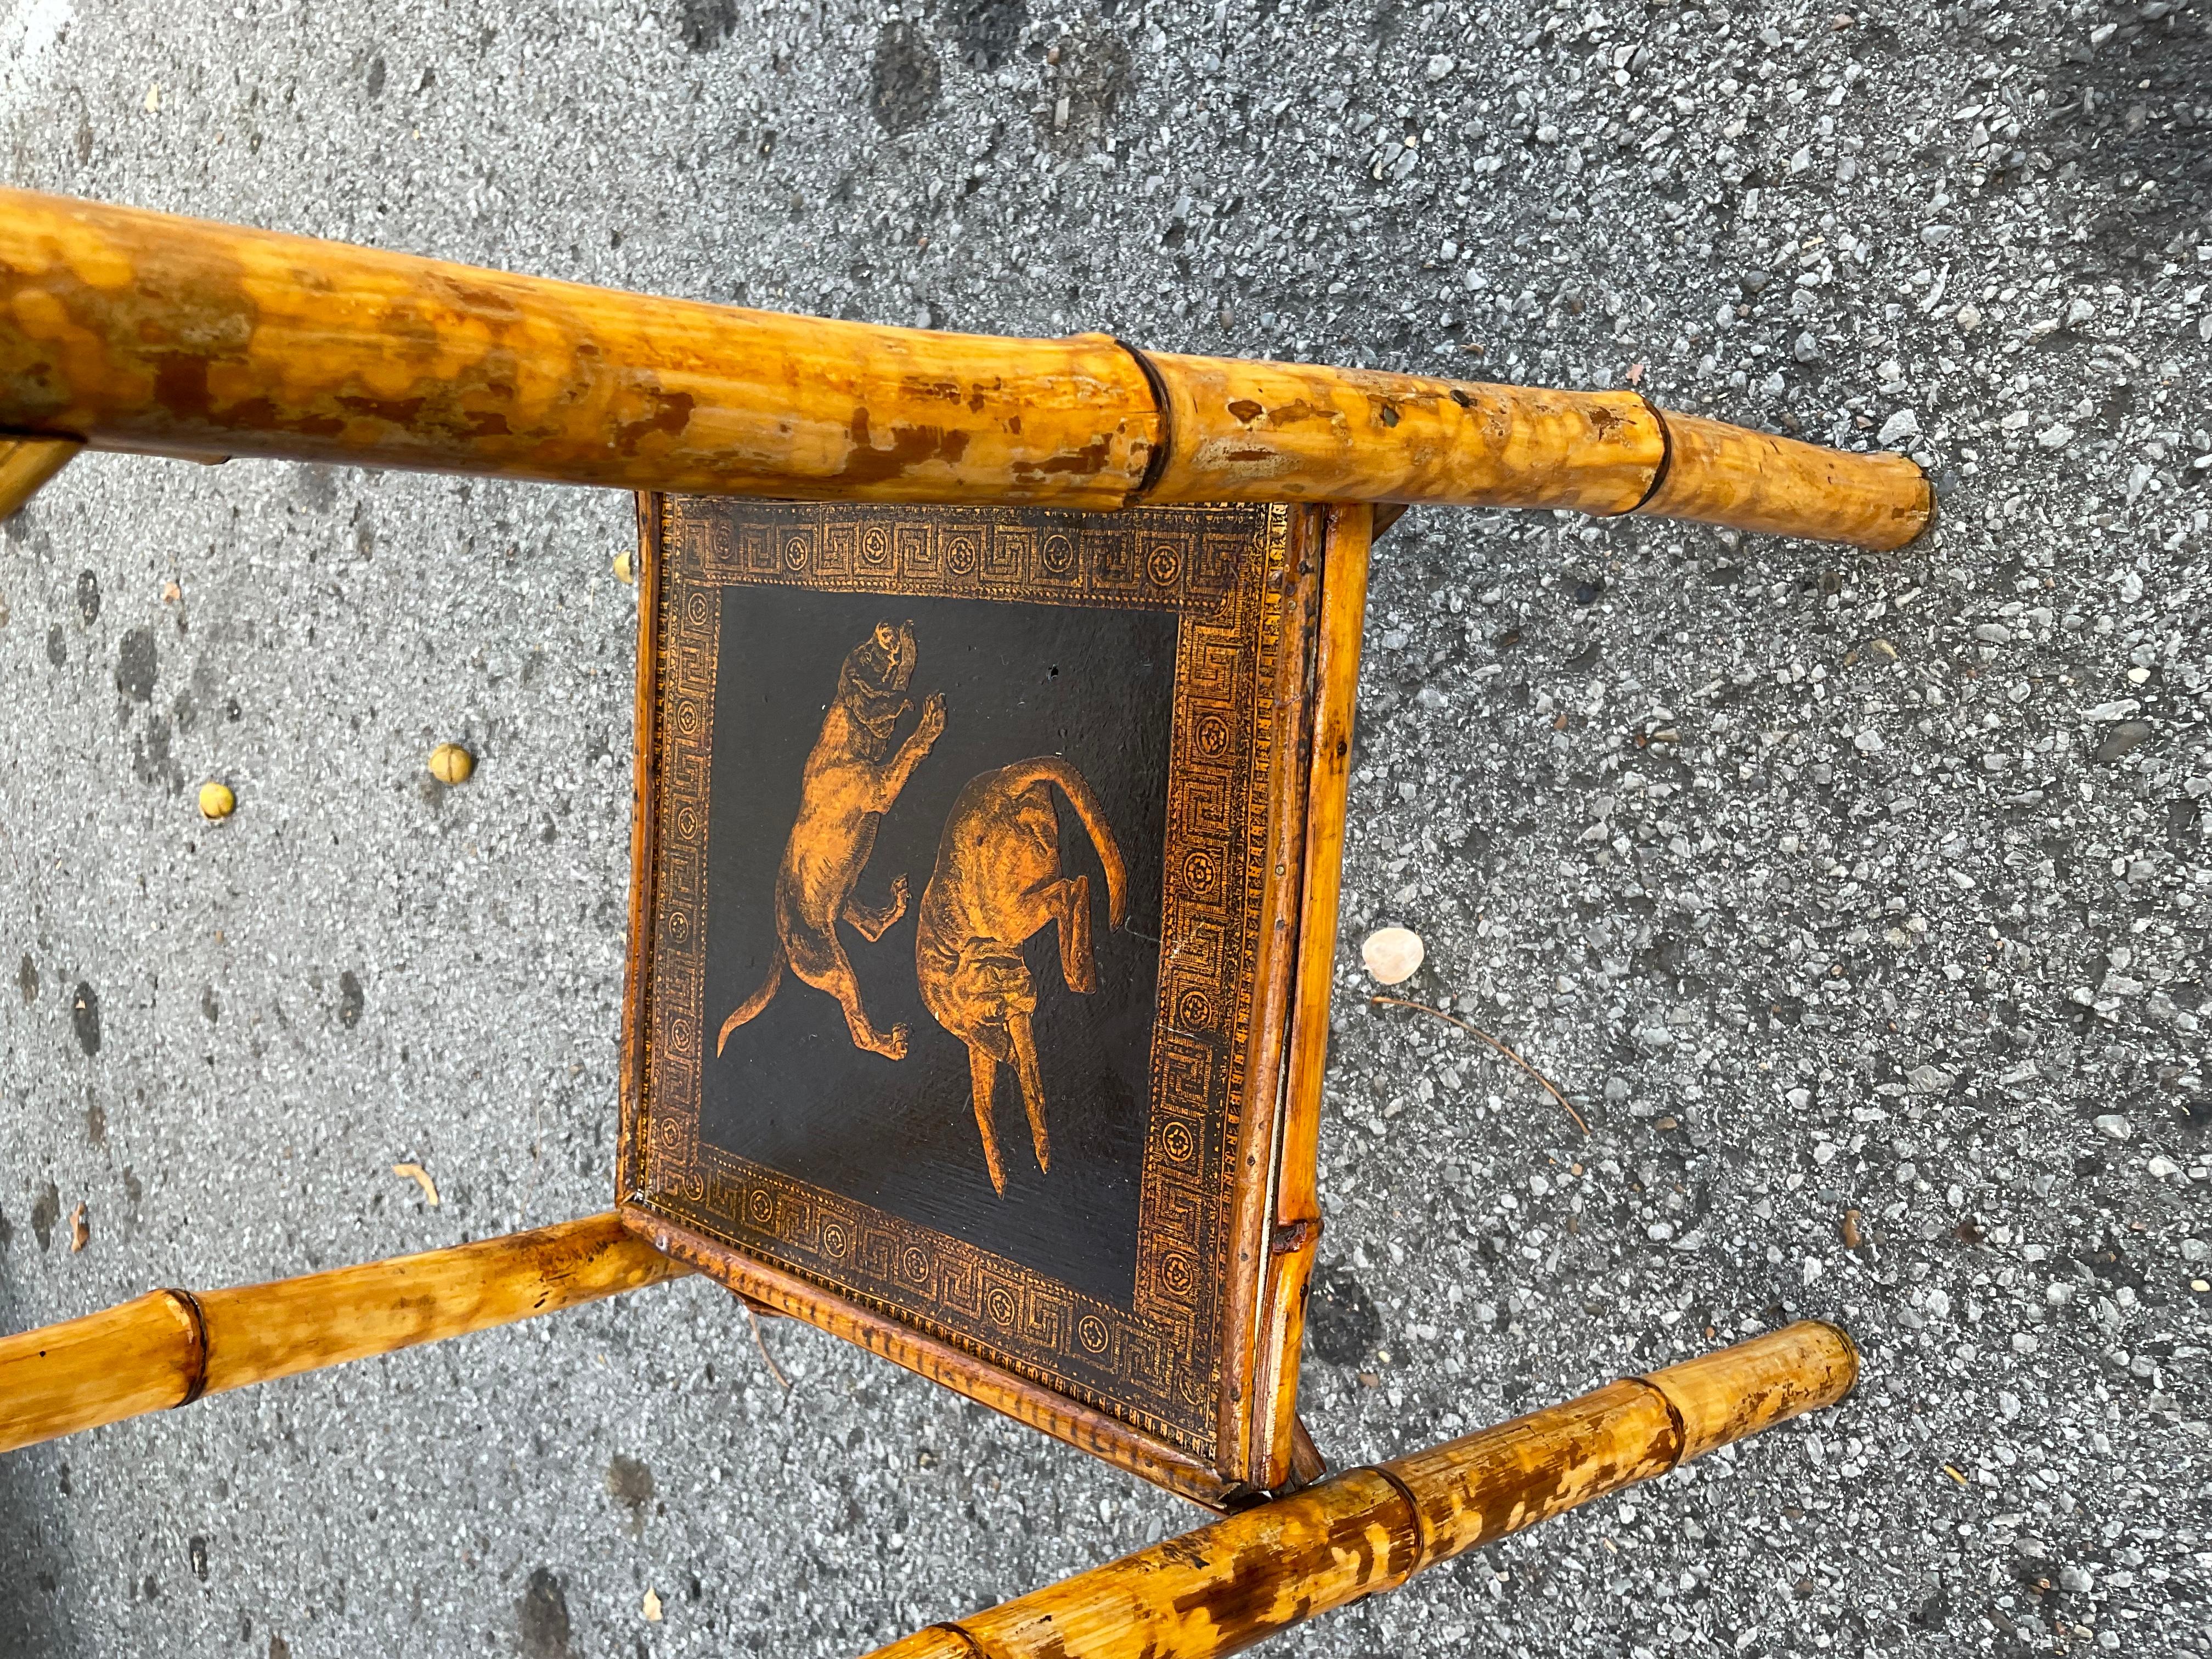 This original 19th century decapodged bamboo side table is simply breathtaking. The beautiful depiction of the dogs, the black and golden color as well as the patina add a warm and unique look to this table that you simply produced anymore. This